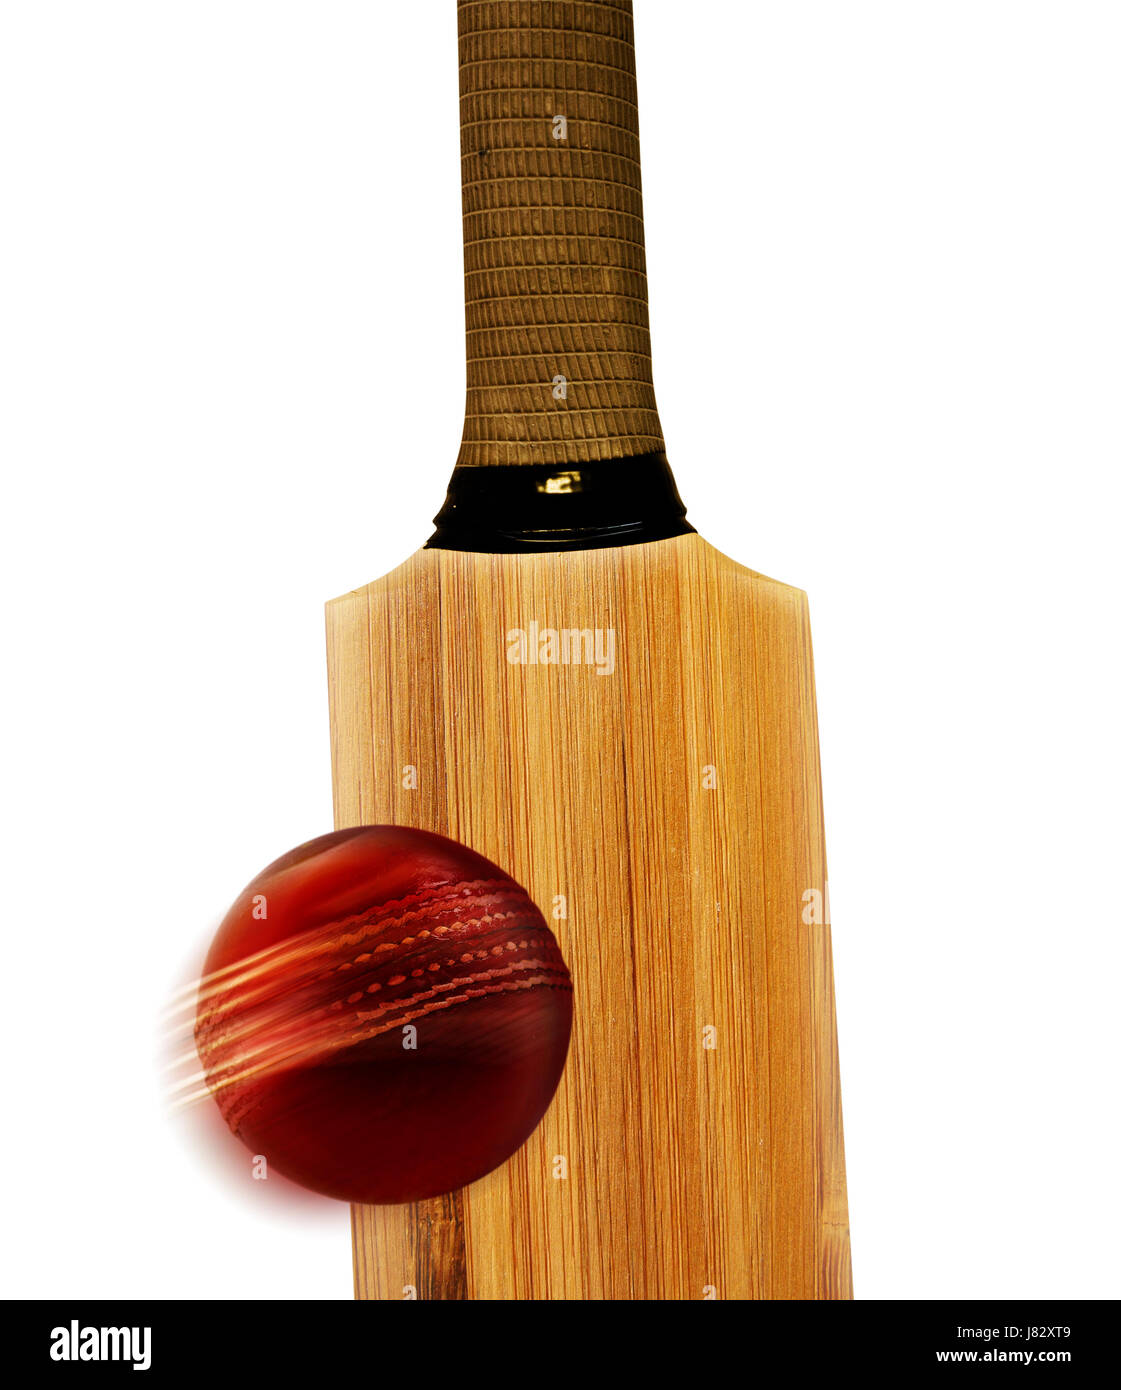 ball bat red cricket bowl objects detail spare time free time leisure leisure Stock Photo